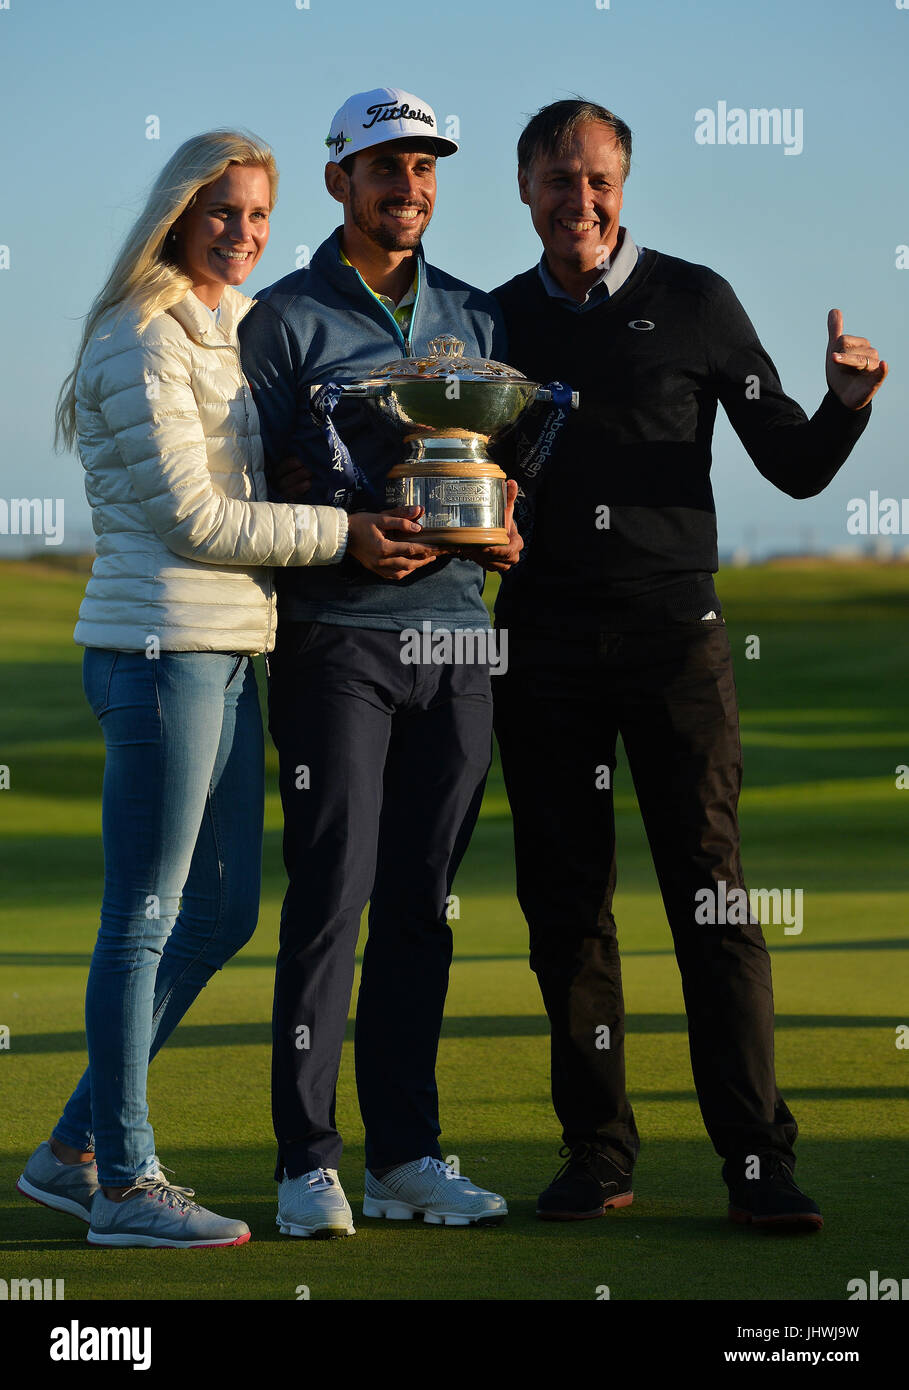 Spain's Rafa Cabrera Bello, girlfriend Sophia and manager Richard Rayment (right) with the trophy after winning the Aberdeen Asset Management Scottish Open during day four of the 2017 Aberdeen Asset Management Scottish Open at Dundonald Links, Troon. Stock Photo